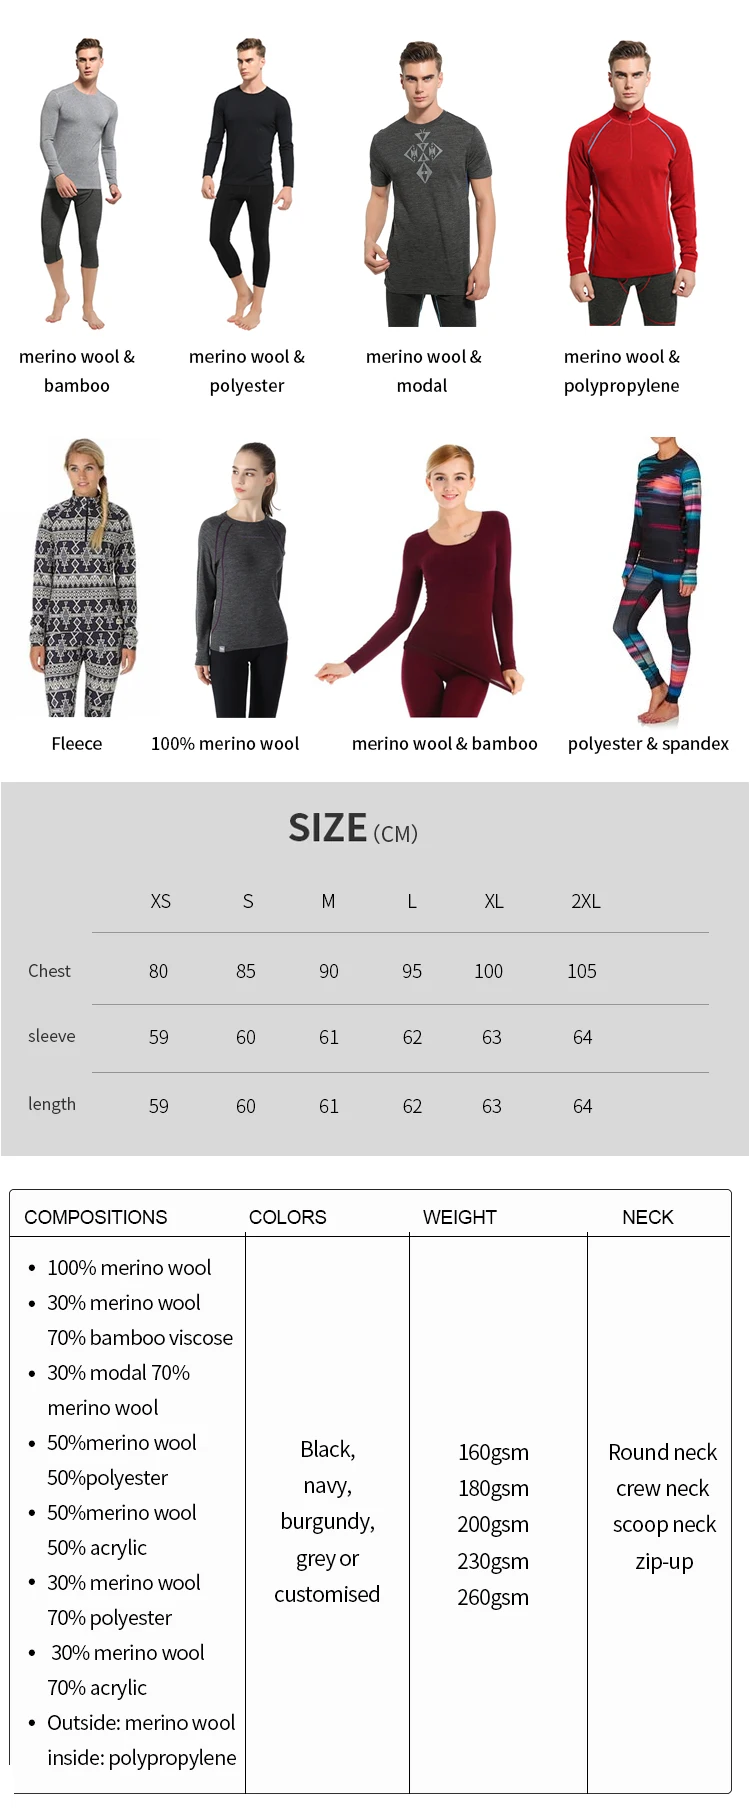 Inexpensive Polyester high-quality thermal Underwear Sets